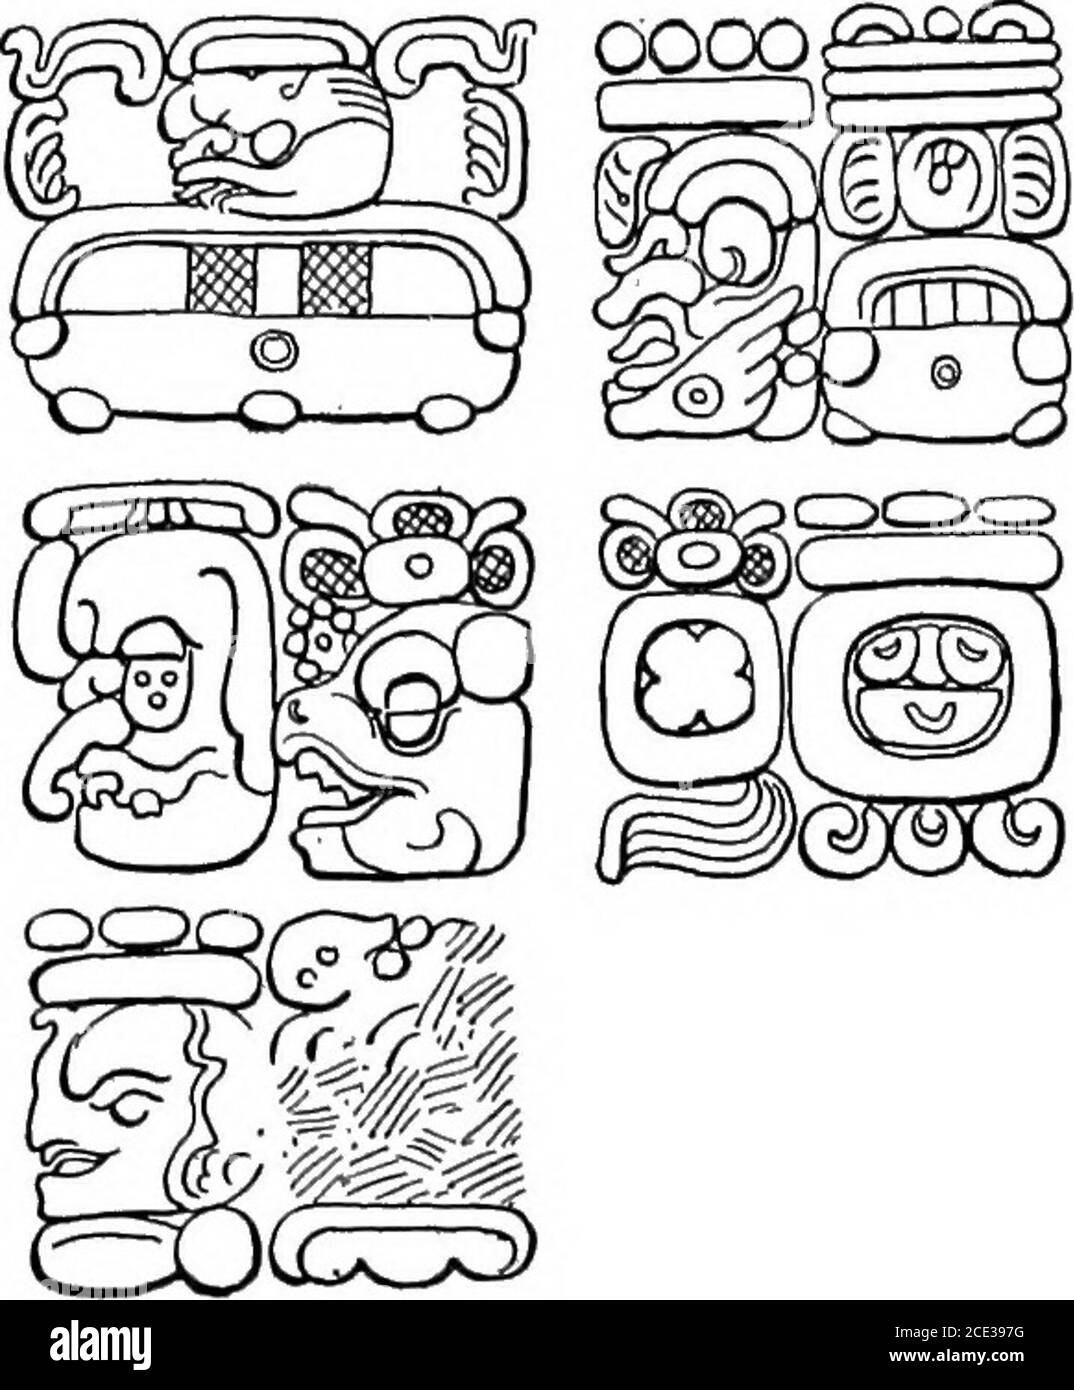 . An introduction to the study of the Maya hieroglyphs . FlG. 08. Initial Series showing bar and dot numerals and liead-variant period glyplis: A, Stela C (westside), Quirigua; B, Stela M, Copan. ducing this ninnber by means of Table XIII to units of the 1st order,we obtaia: A3 = 9 X 144, 000 = 1, 296, 000 B3 = 1 X 7, 200 = 7, 200 A4 = 0X 360= 0 B4=0X 20= 0 A5=0X 1= 0 1, 303, 200 Deducting from this number all the Calendar Sounds possible, 68(see Table XVI), and applying rules 1, 2, and 3 (pp. 139, 140, and 141,respectively) to the remainder, we reach for the terminal date 6 Ahau13 Yaxkin. Loo Stock Photo